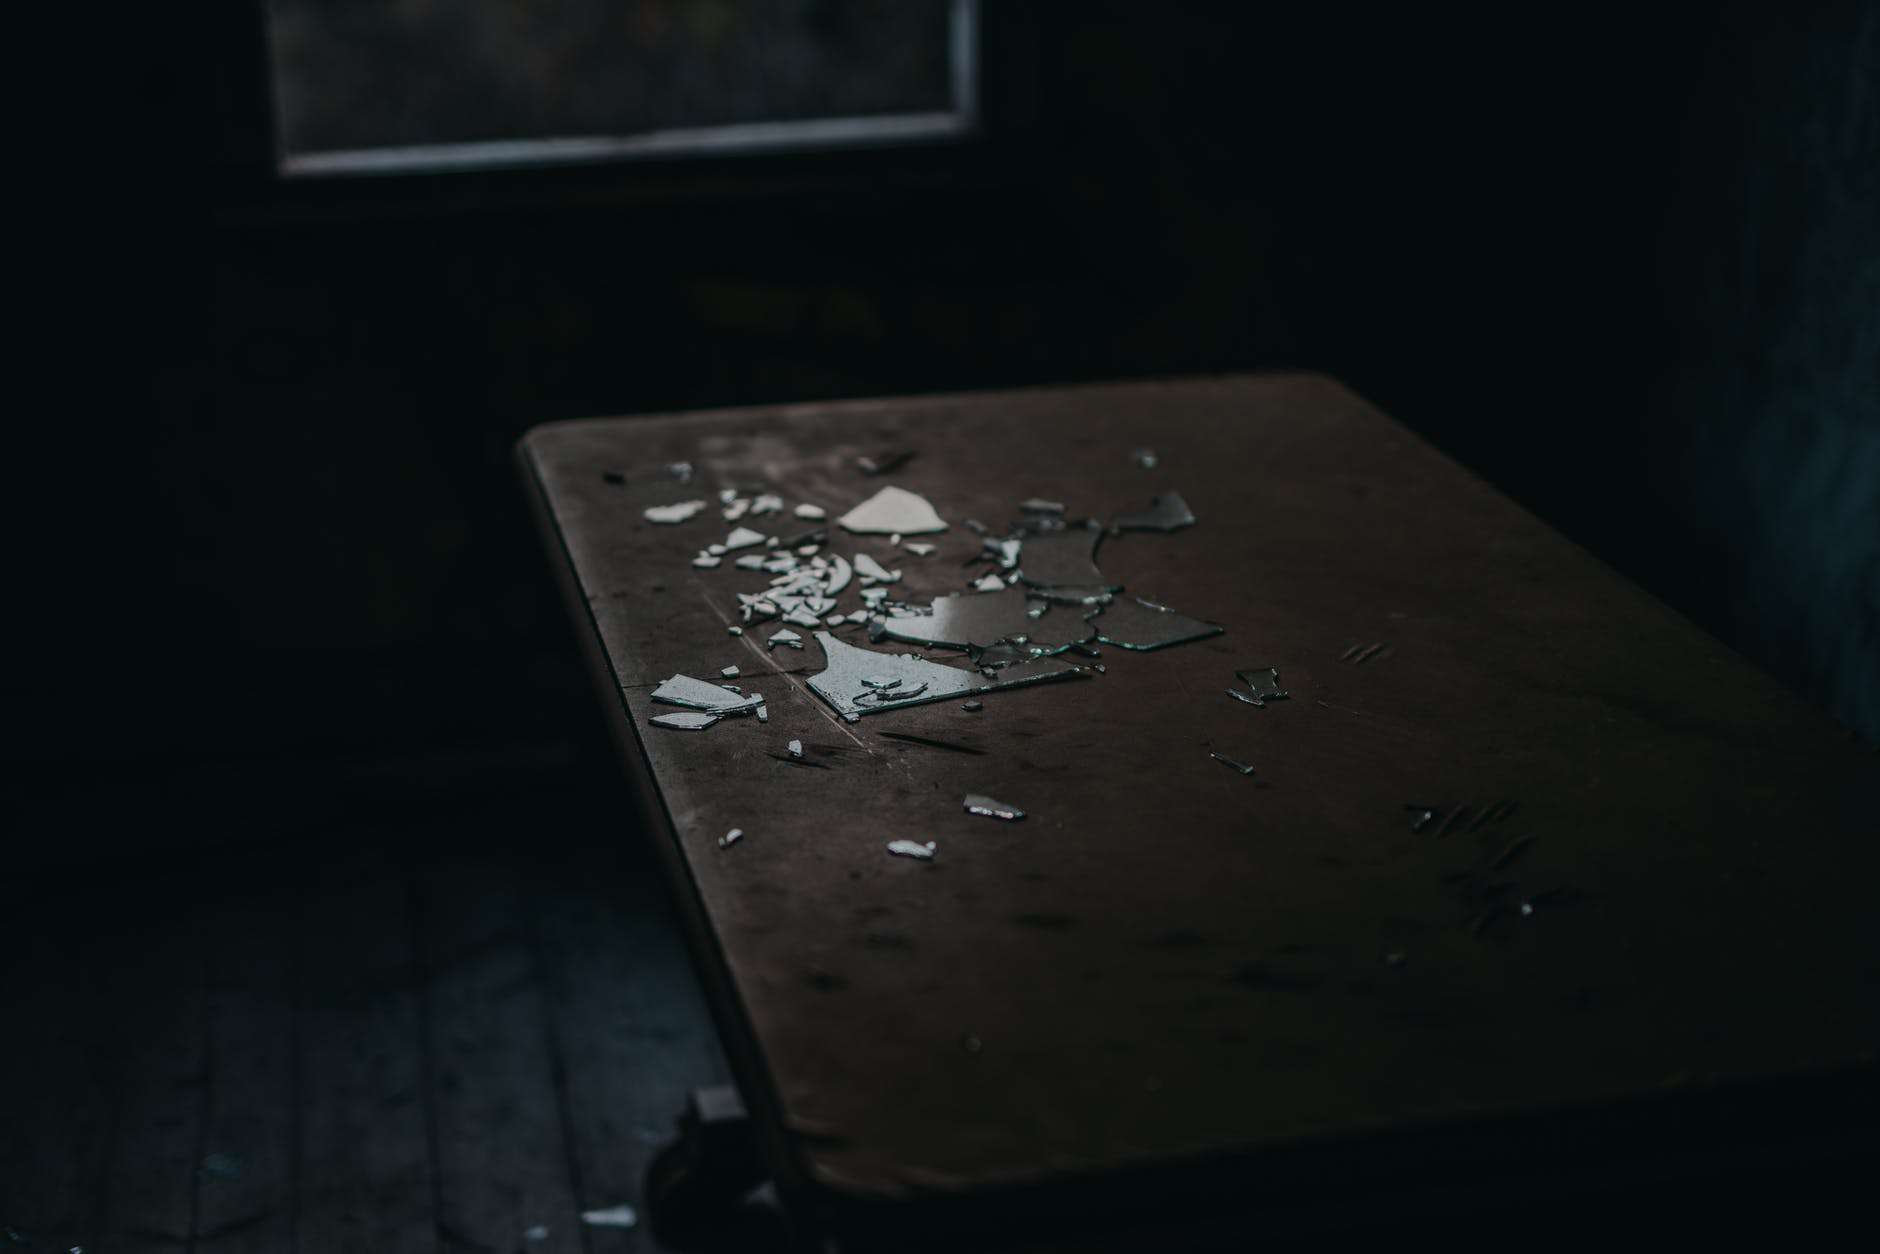 shards of broken glass on table